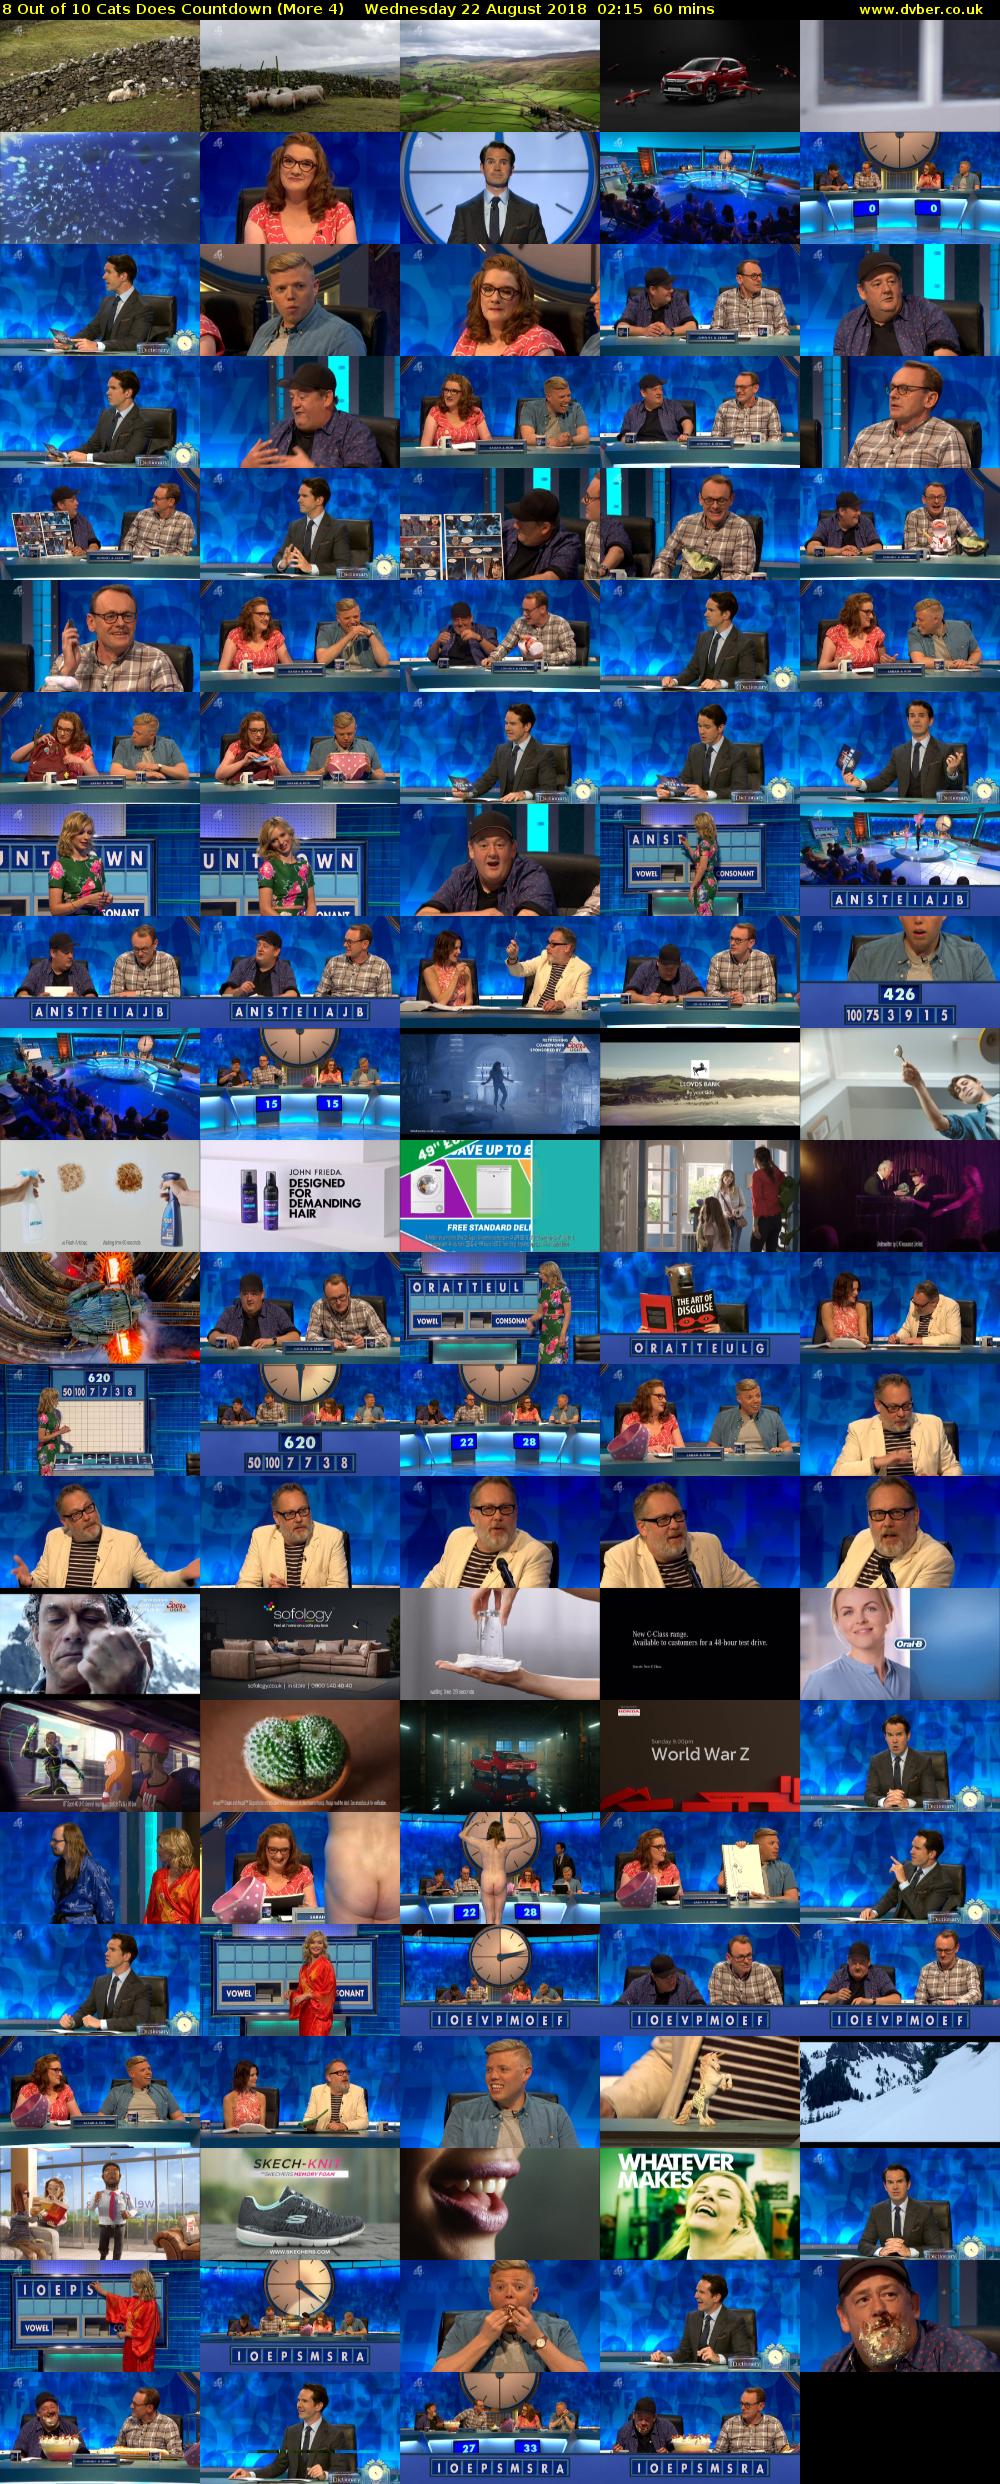 8 Out of 10 Cats Does Countdown (More 4) Wednesday 22 August 2018 02:15 - 03:15